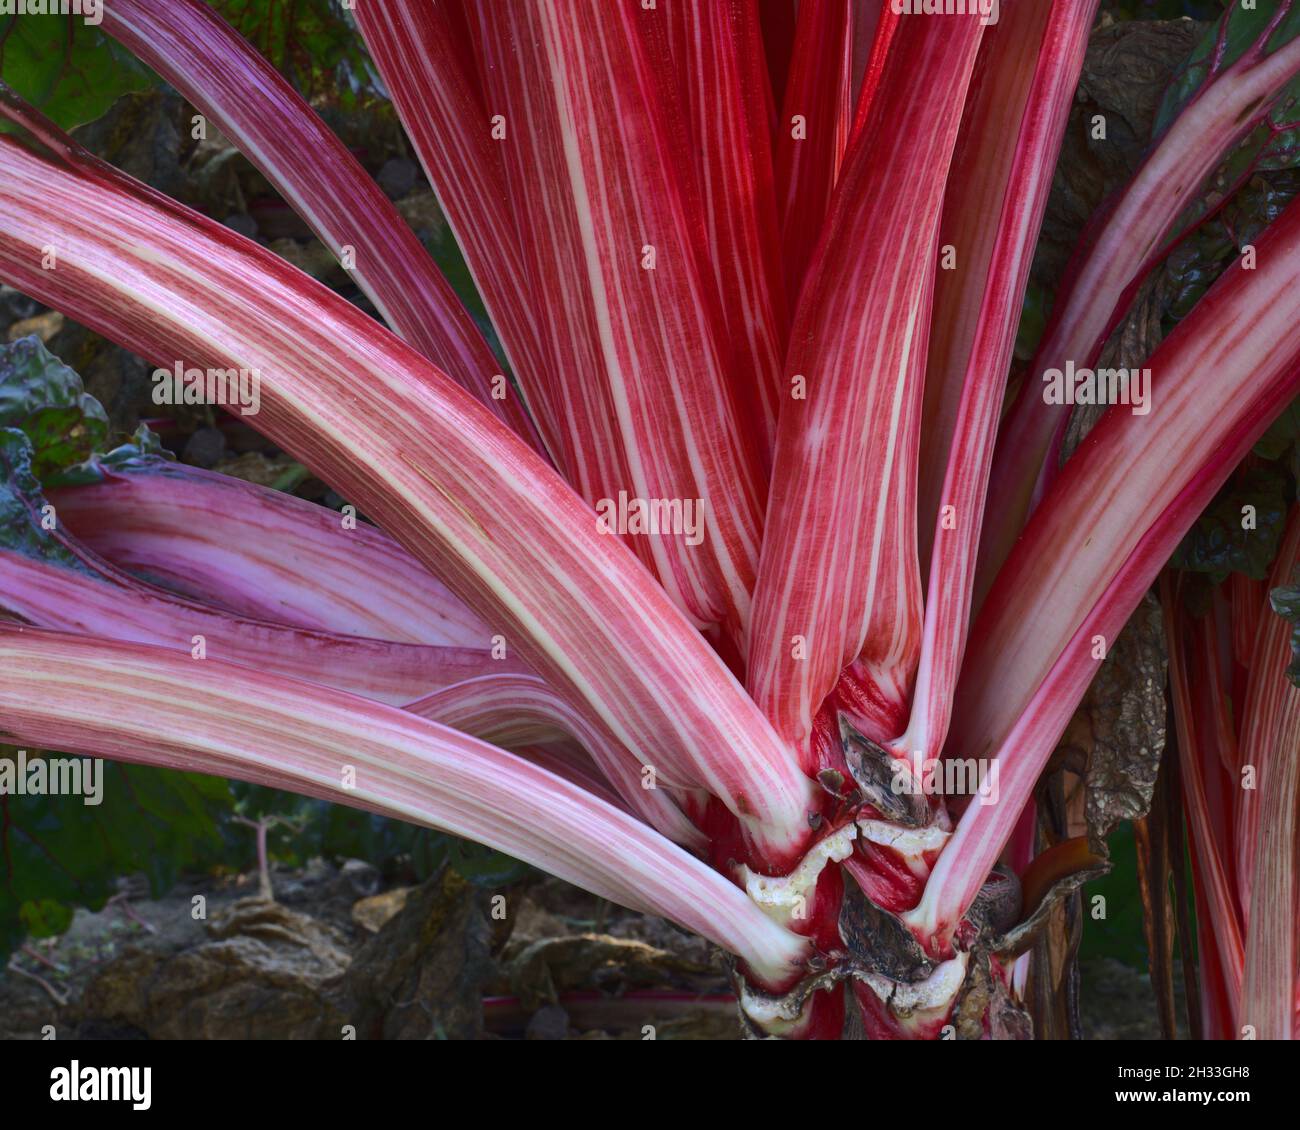 The crimson stems of red swiss chard vegetable plant Stock Photo